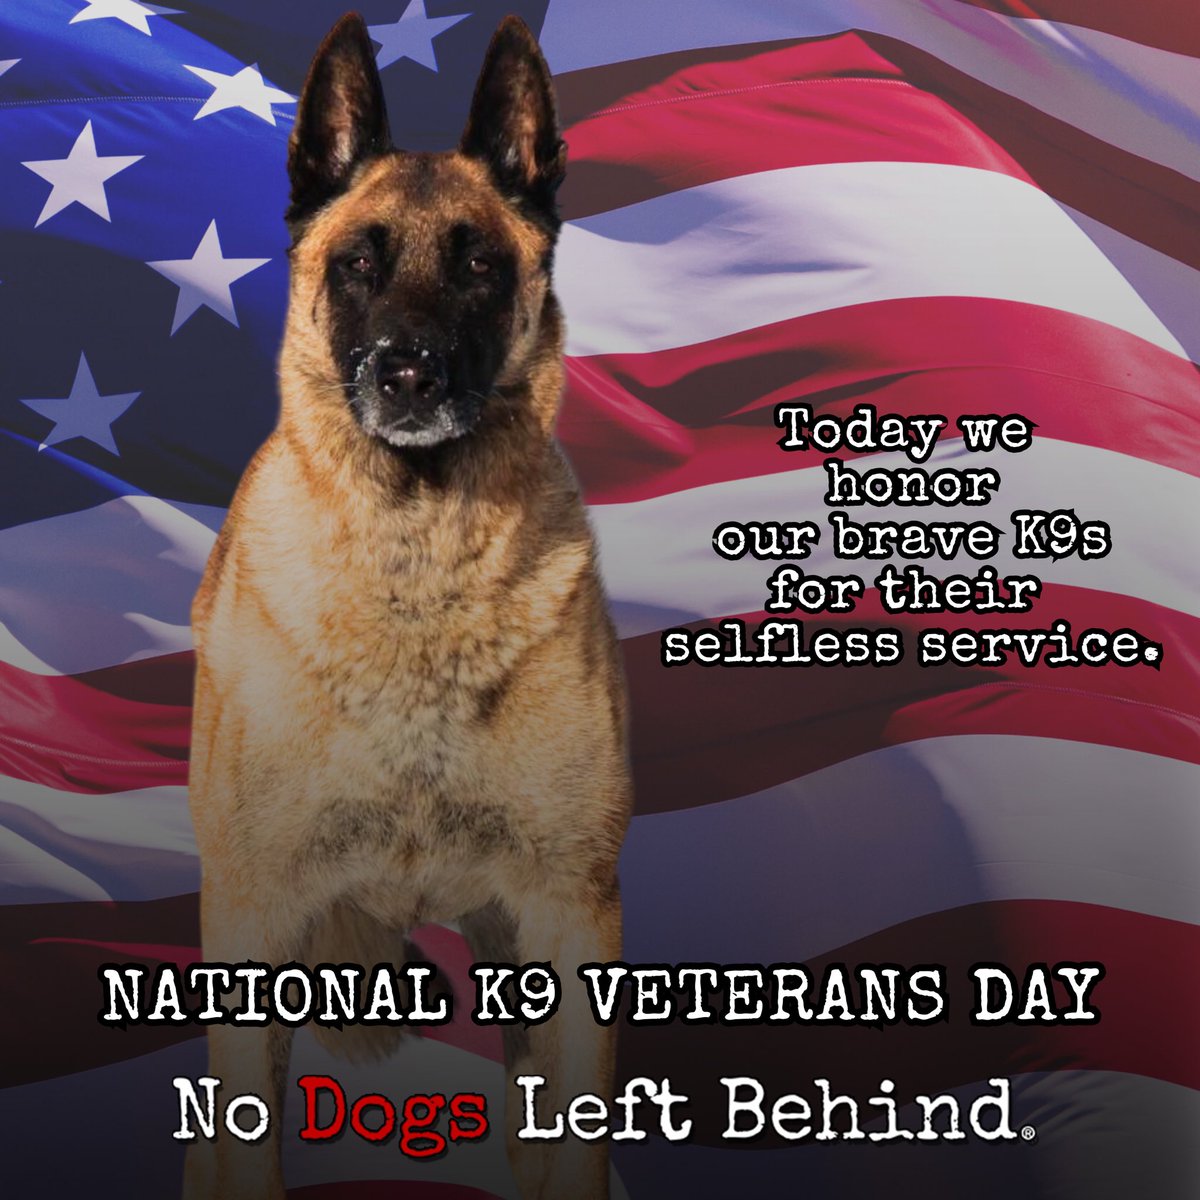 On National K9 Veterans Day, we honor the selfless service of our K9 military dogs. Thank you for your service! 

#nodogsleftbehind #freedom #protection #selflessservice #k9 #malinois #nationalk9veteransday #servicedogs